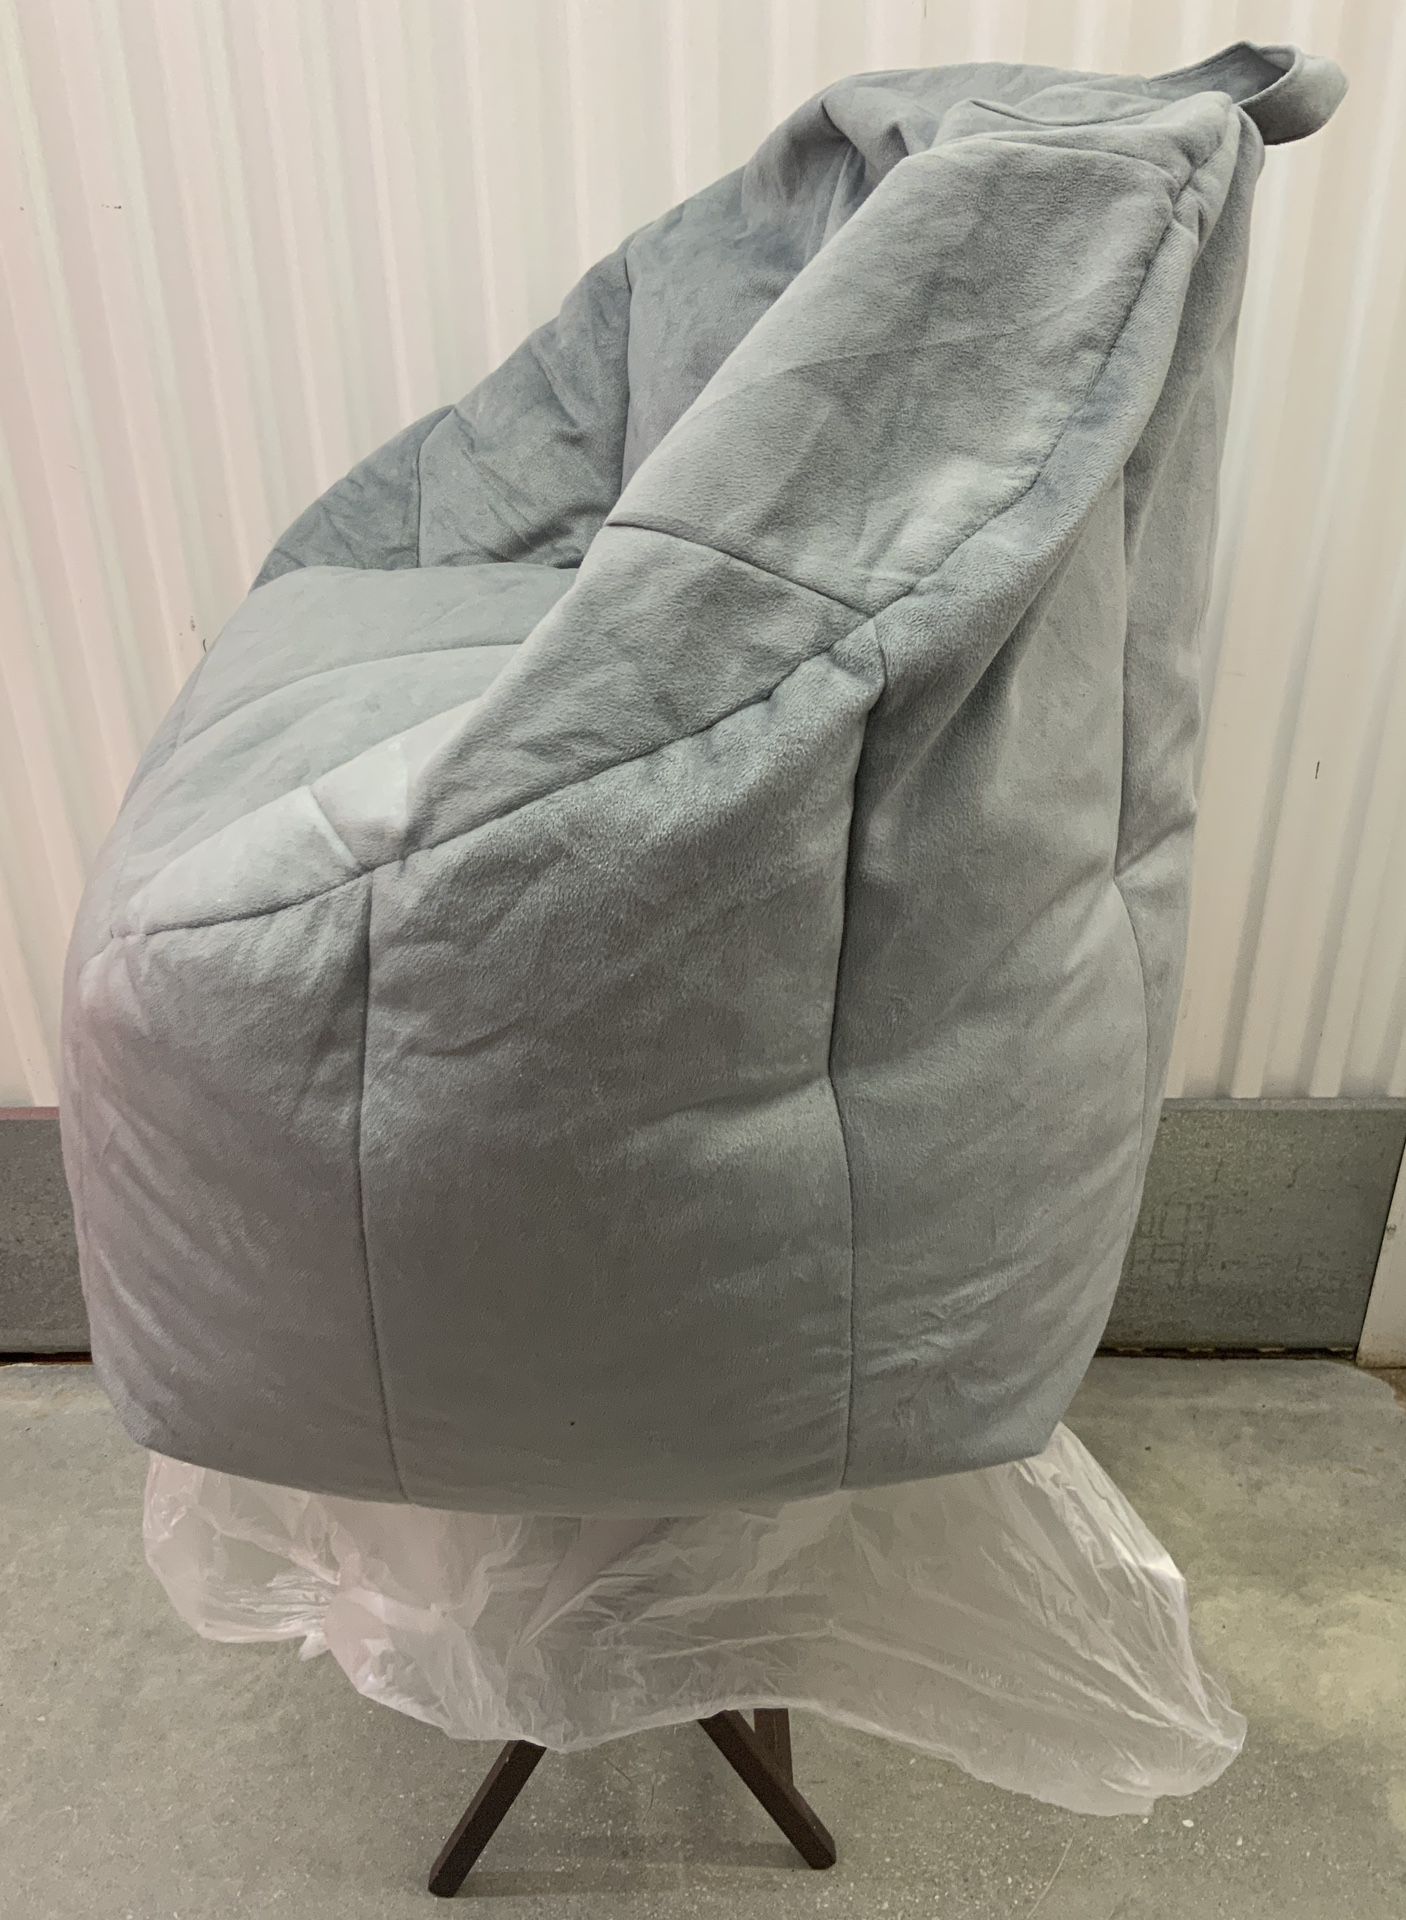 BRAND NEW!!  GREAT for GAMING !!  Velour Beanbag Chair Gray So Soft Plush Comfortable w/ Handle... Value $45